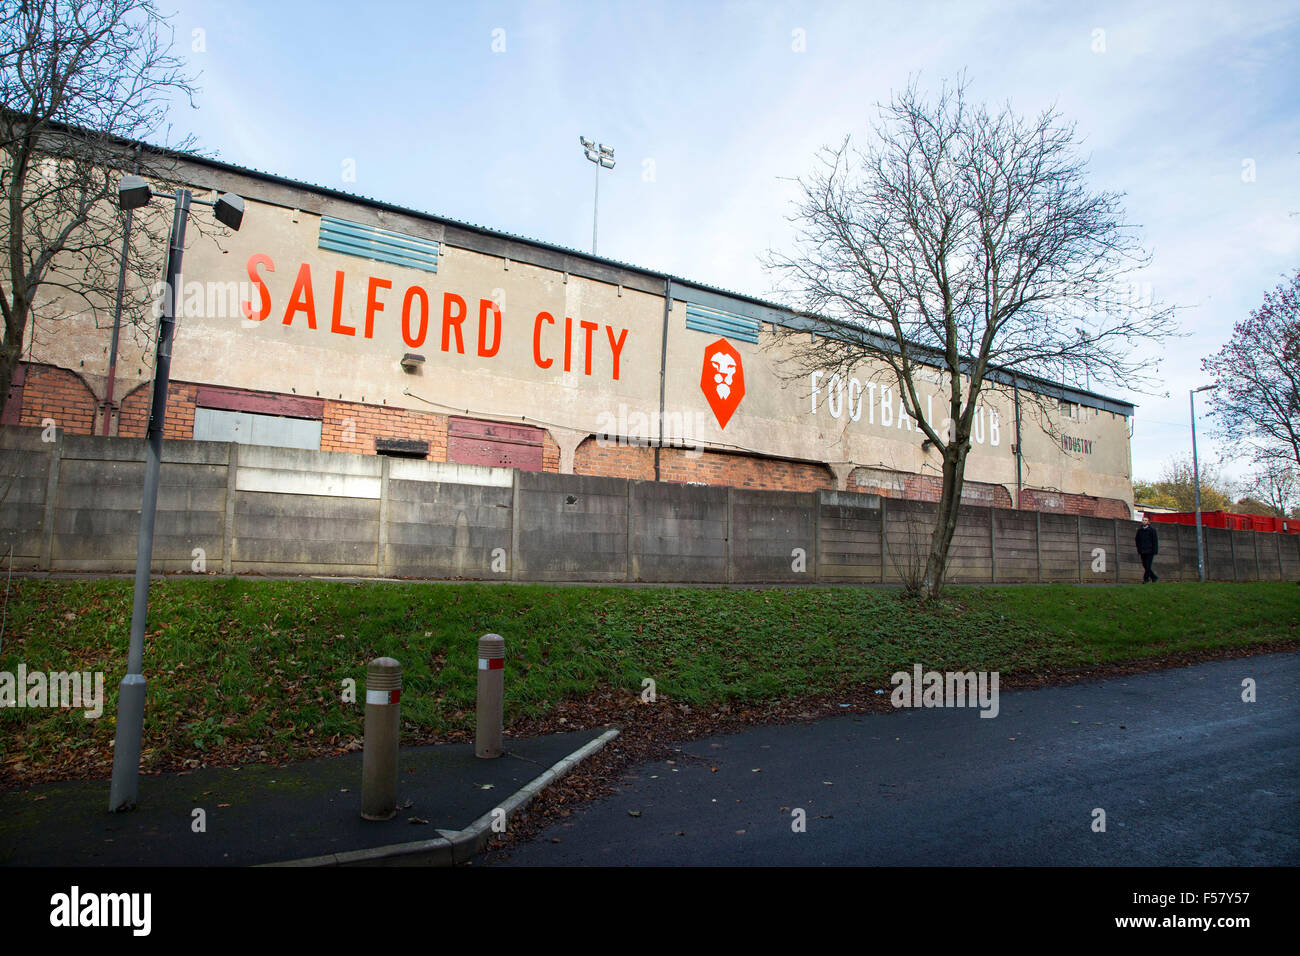 Salford City Football club in Manchester members of the Northern Premier League Premier Division in England Stock Photo